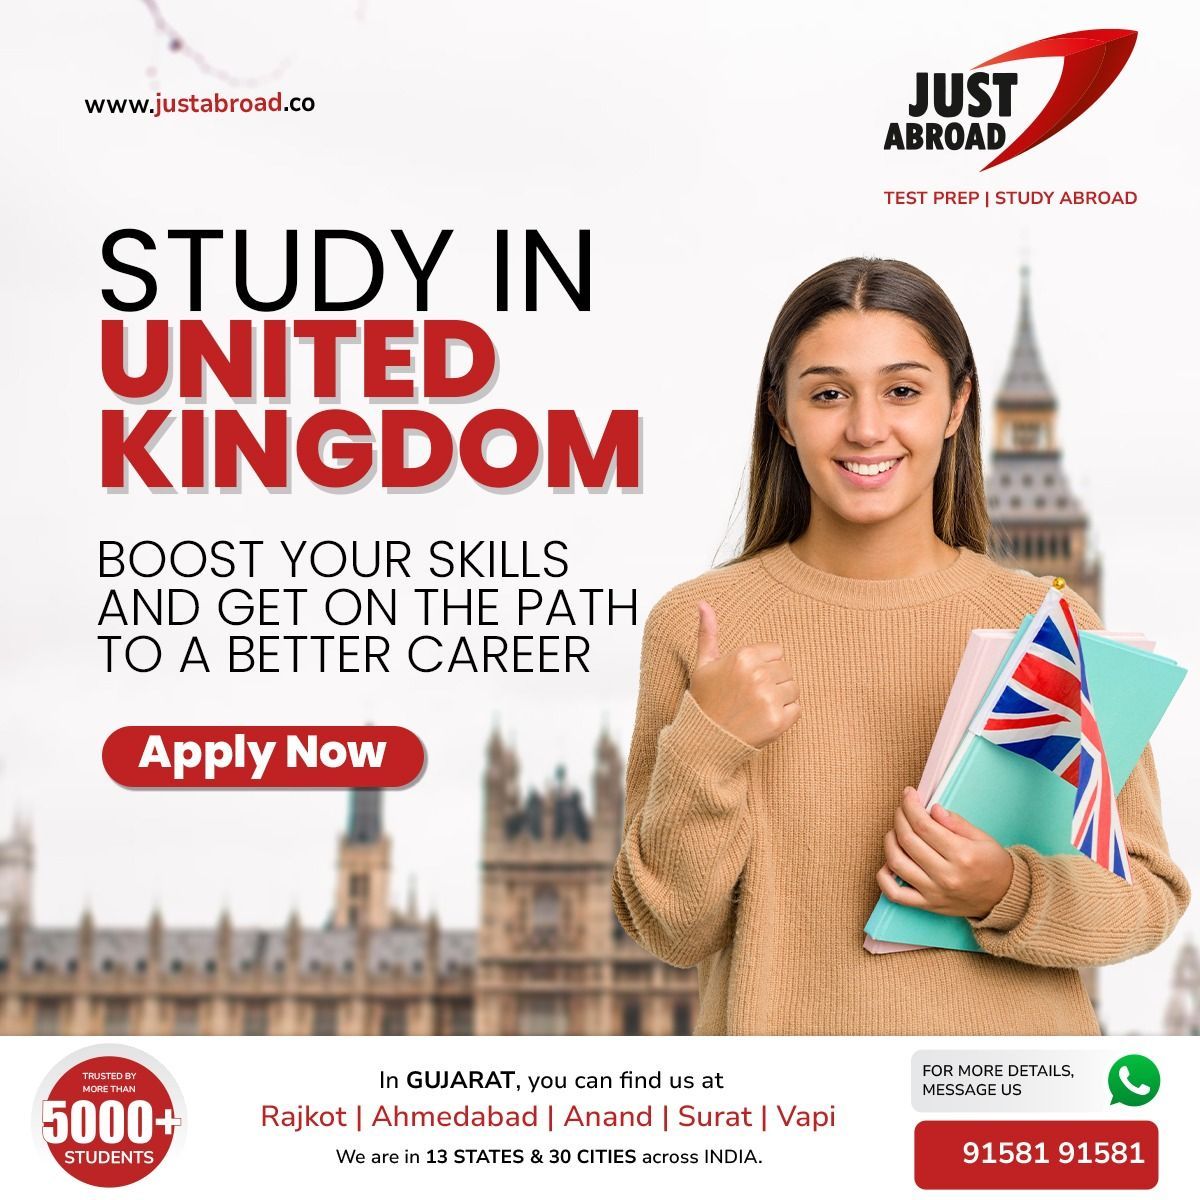 🎓🇬🇧 Ready to take your career to the next level? Study in the United Kingdom and boost your skills for a brighter future! 🌟✈️ 

#JustAbroad #StudyInUK #CareerBoost #FutureLeaders #DreamBig #GlobalEducation #EducationalAdventure #ExploreTheWorld #YourPathToSuccess #UKExperience